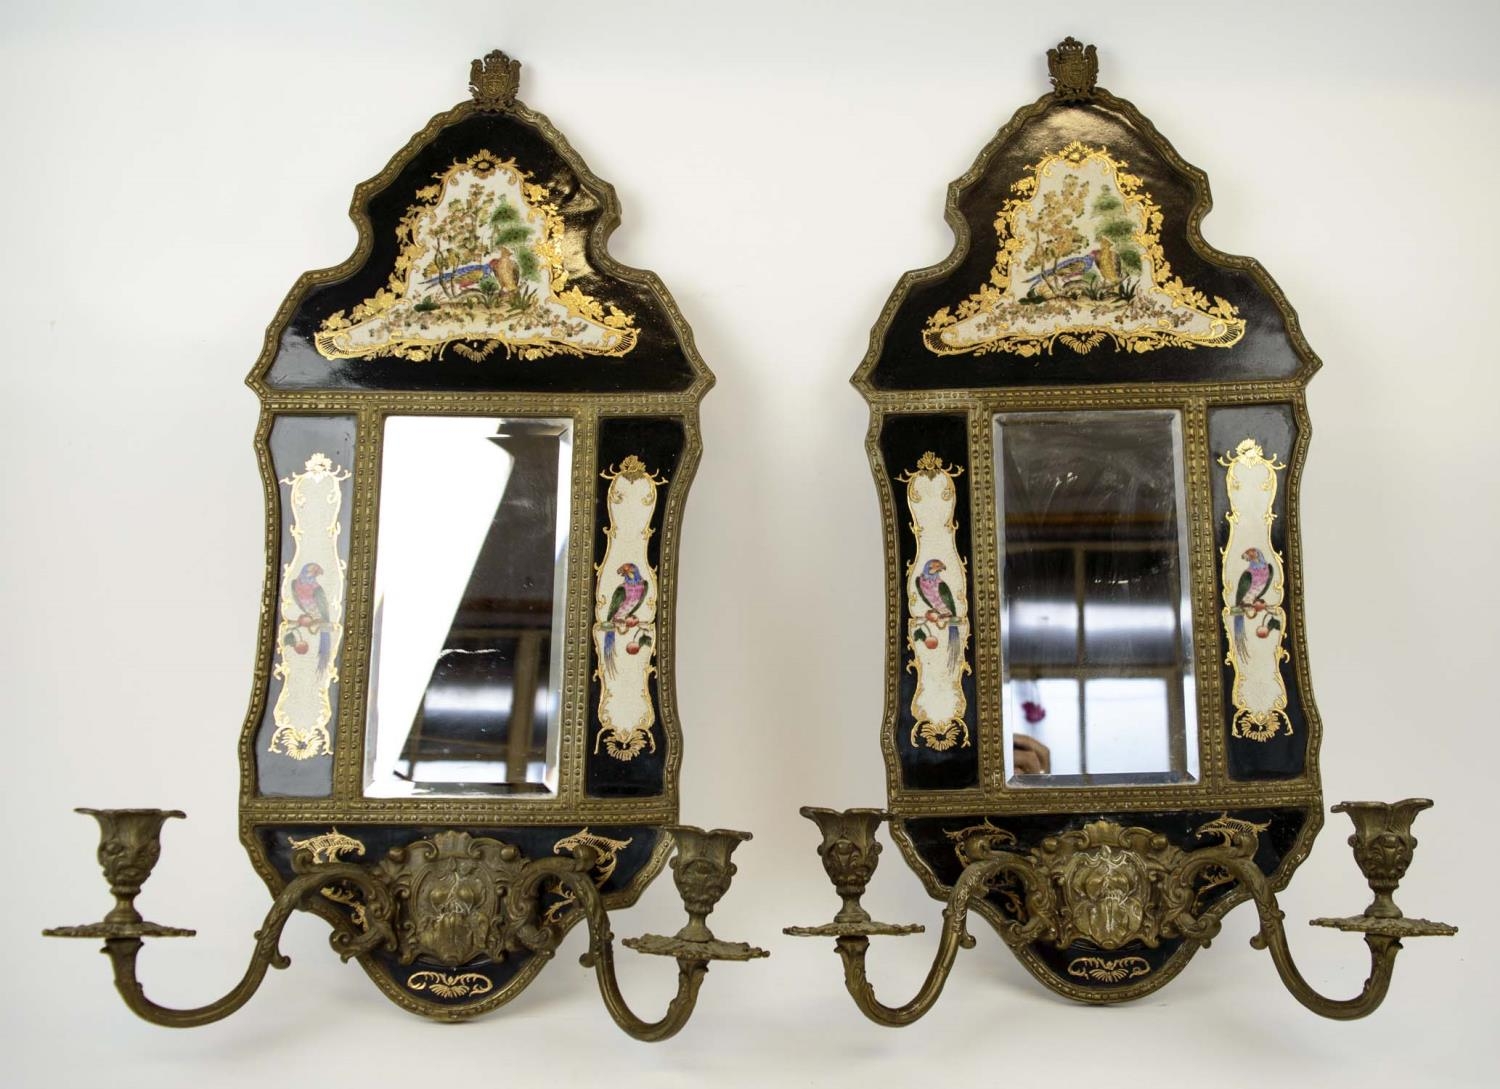 WALL SCONCES, a pair, 18th century Chinese export style, with ceramic inset famille noire panels,